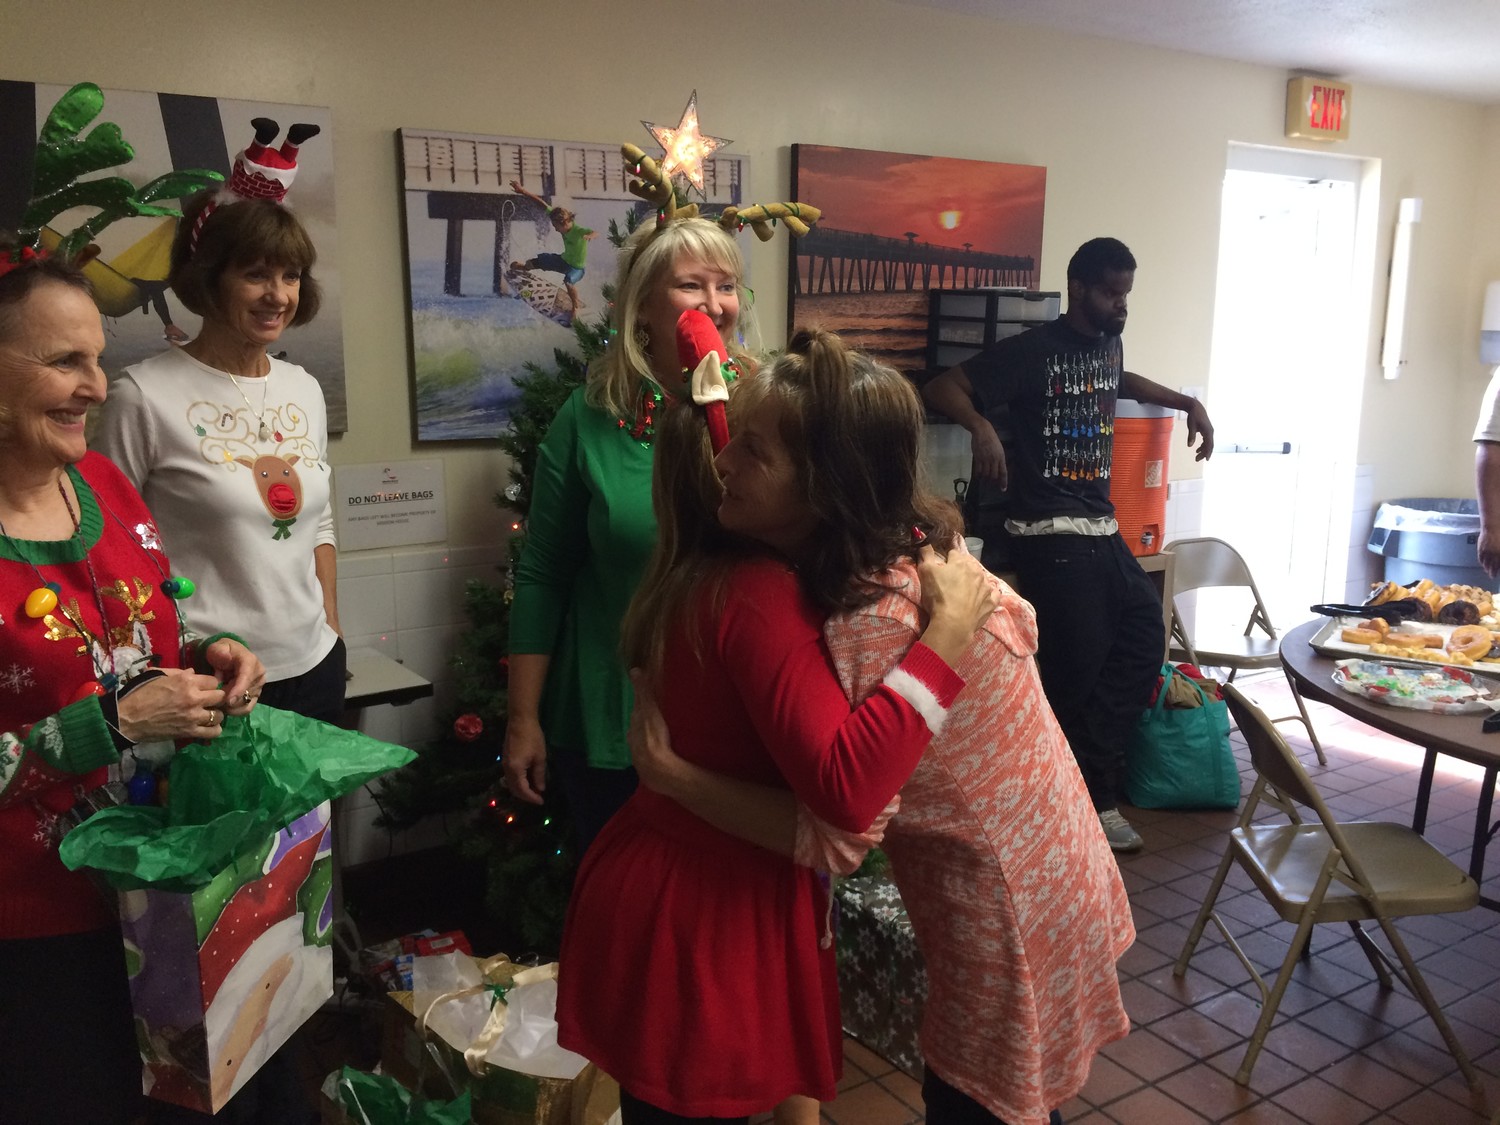 A Mission House visitor gives a volunteer a hug after receiving her gift.